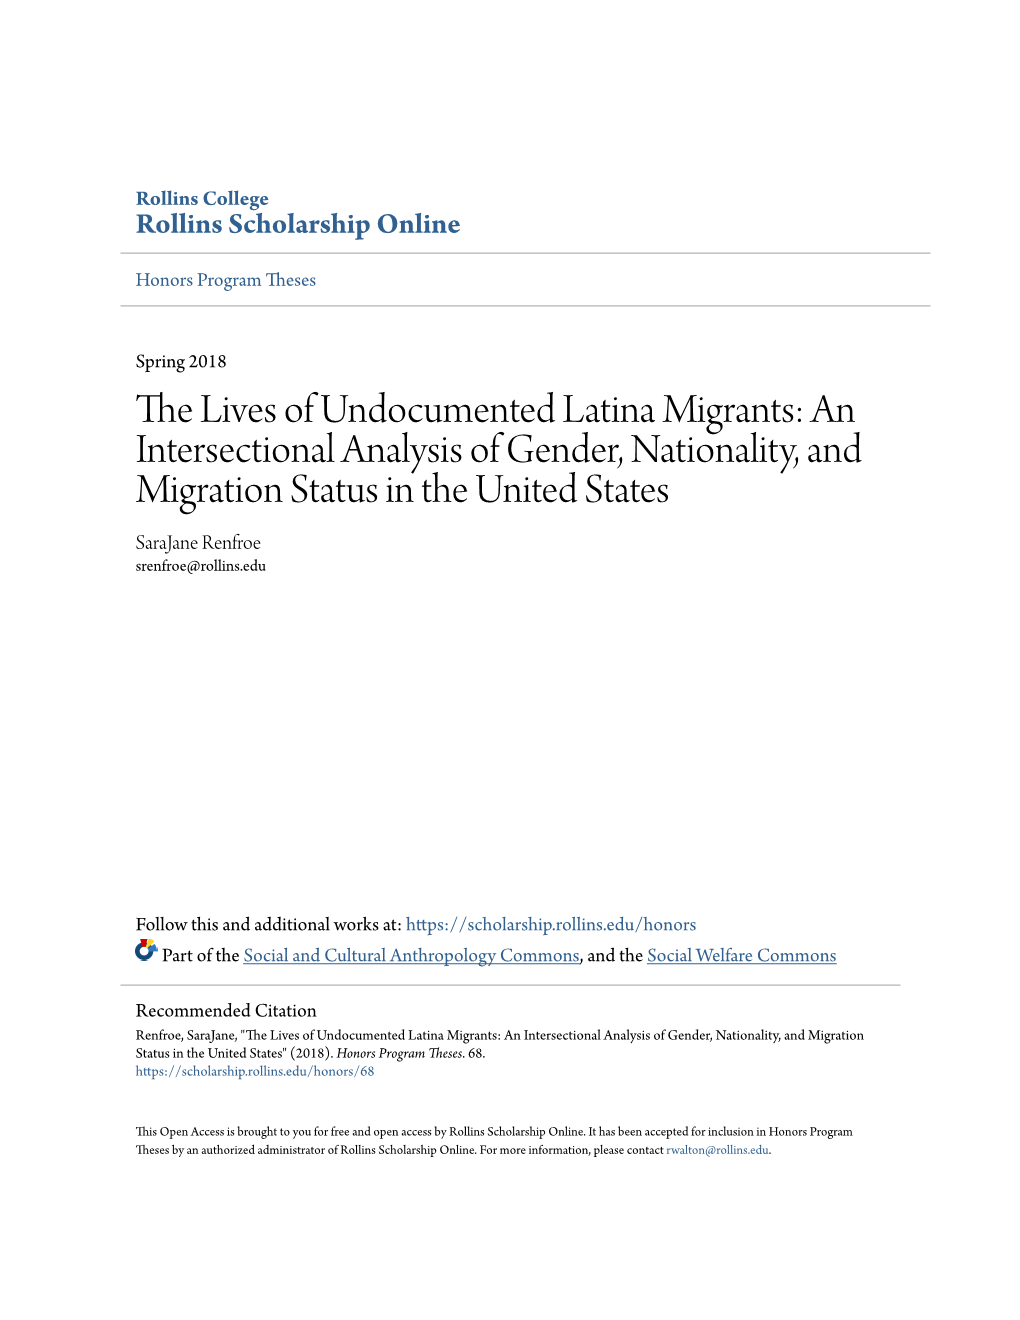 The Lives of Undocumented Latina Migrants: an Intersectional Analysis of Gender, Nationality, and Migration Status in the United